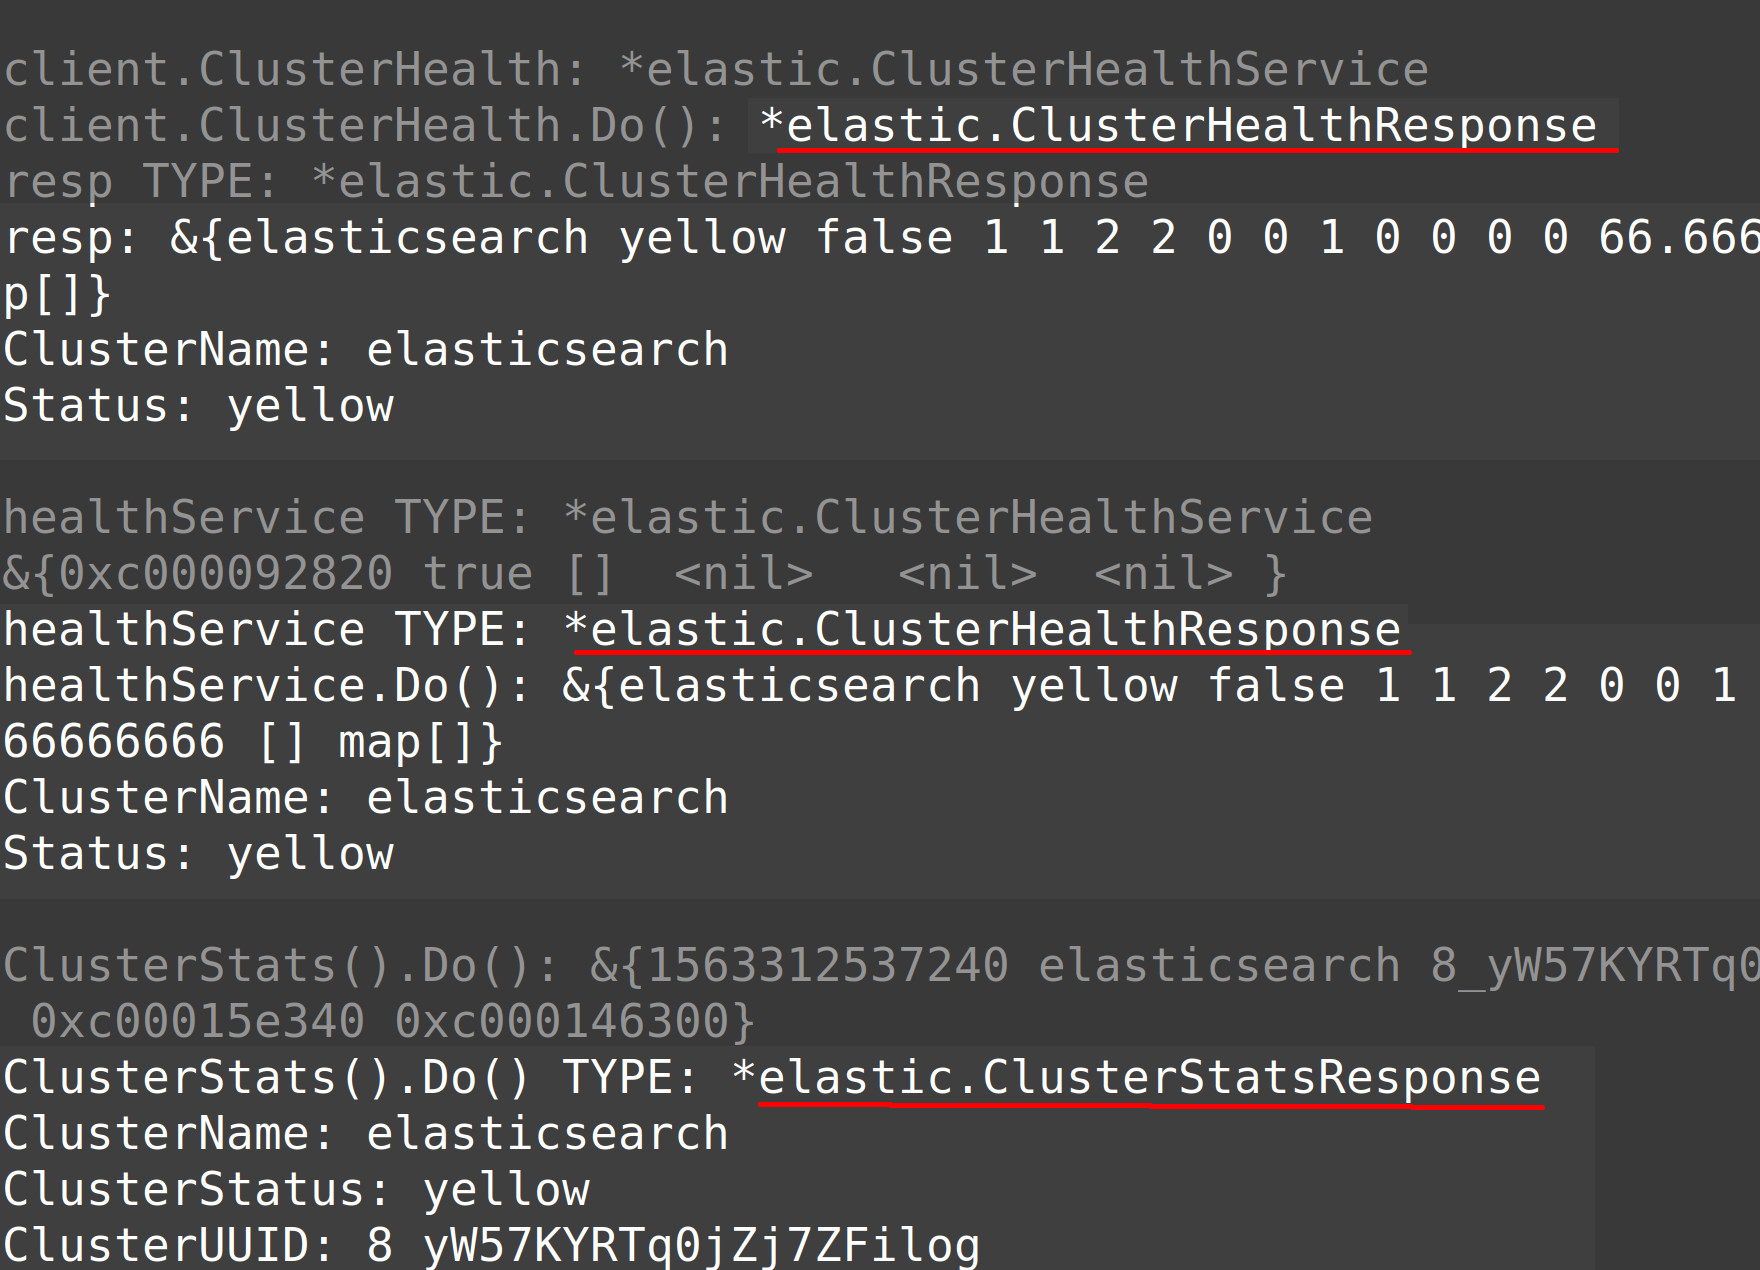 Terminal screenshot of the Elasticsearch cluster health and stats output in Golang